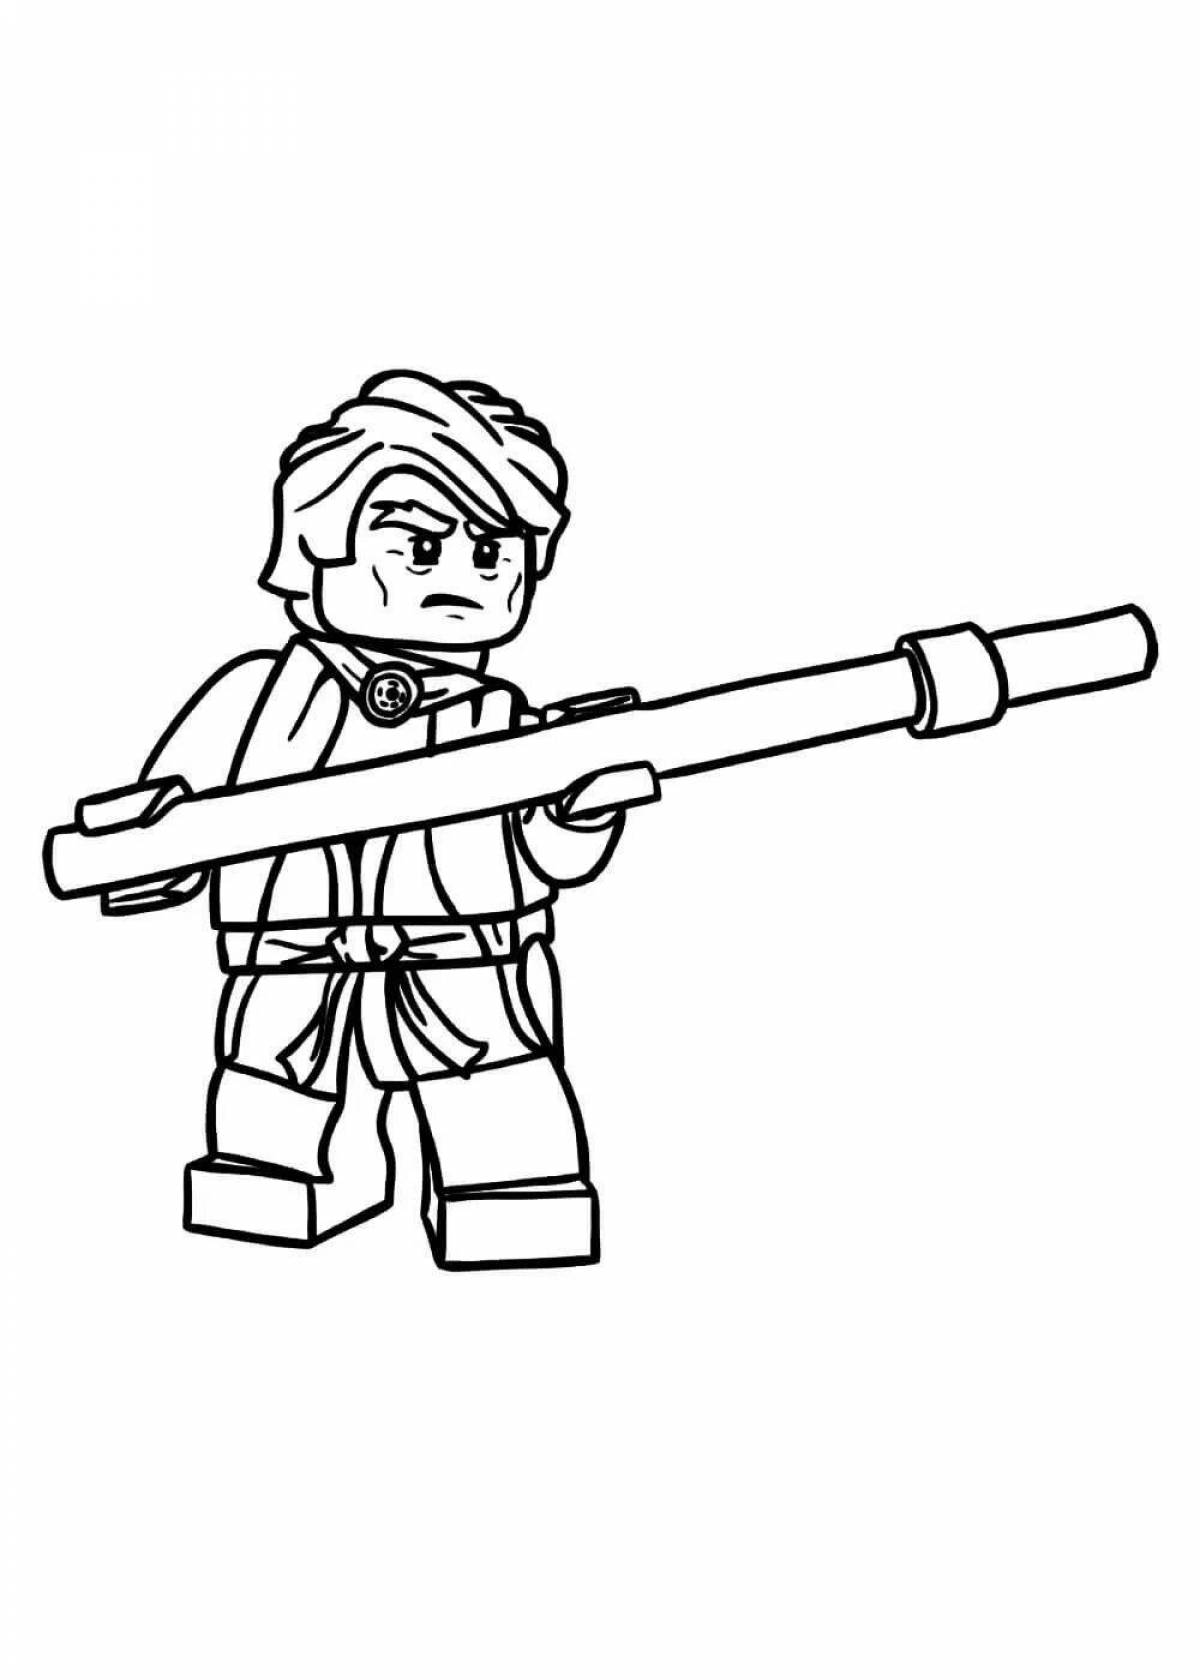 Intricate ninjago cole coloring page